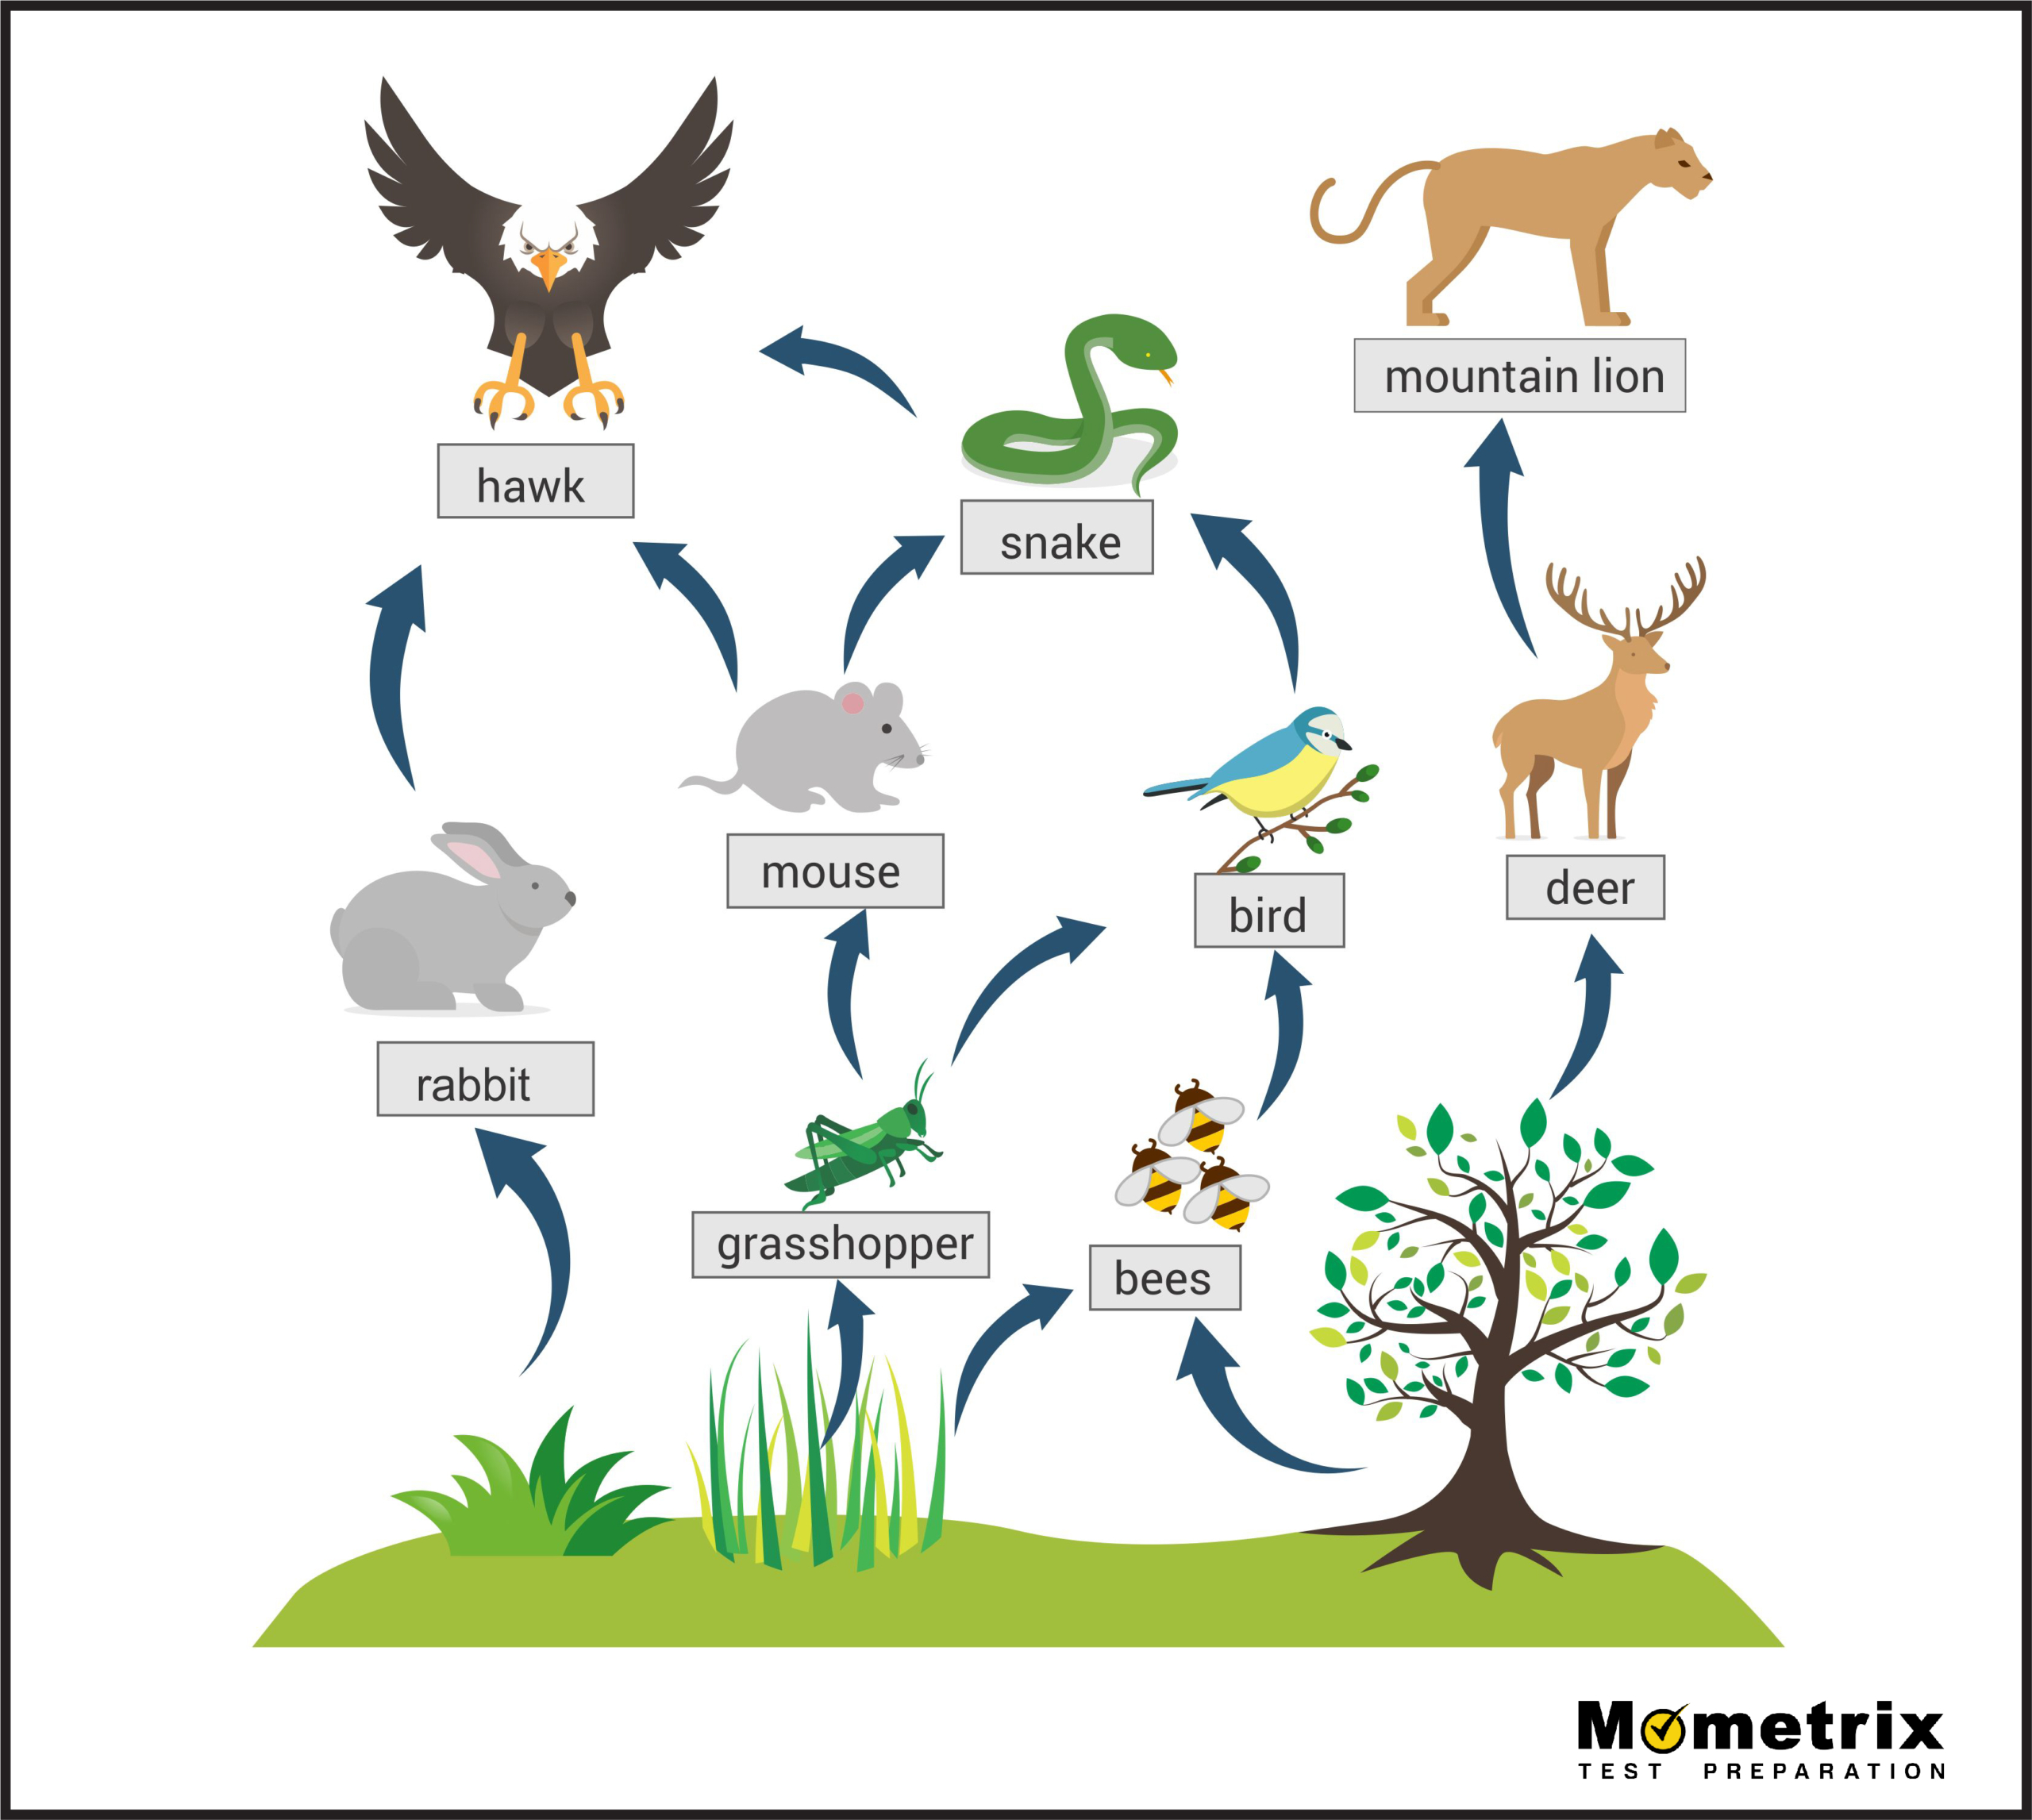 <p>What are the secondary consumers in this food web?</p>